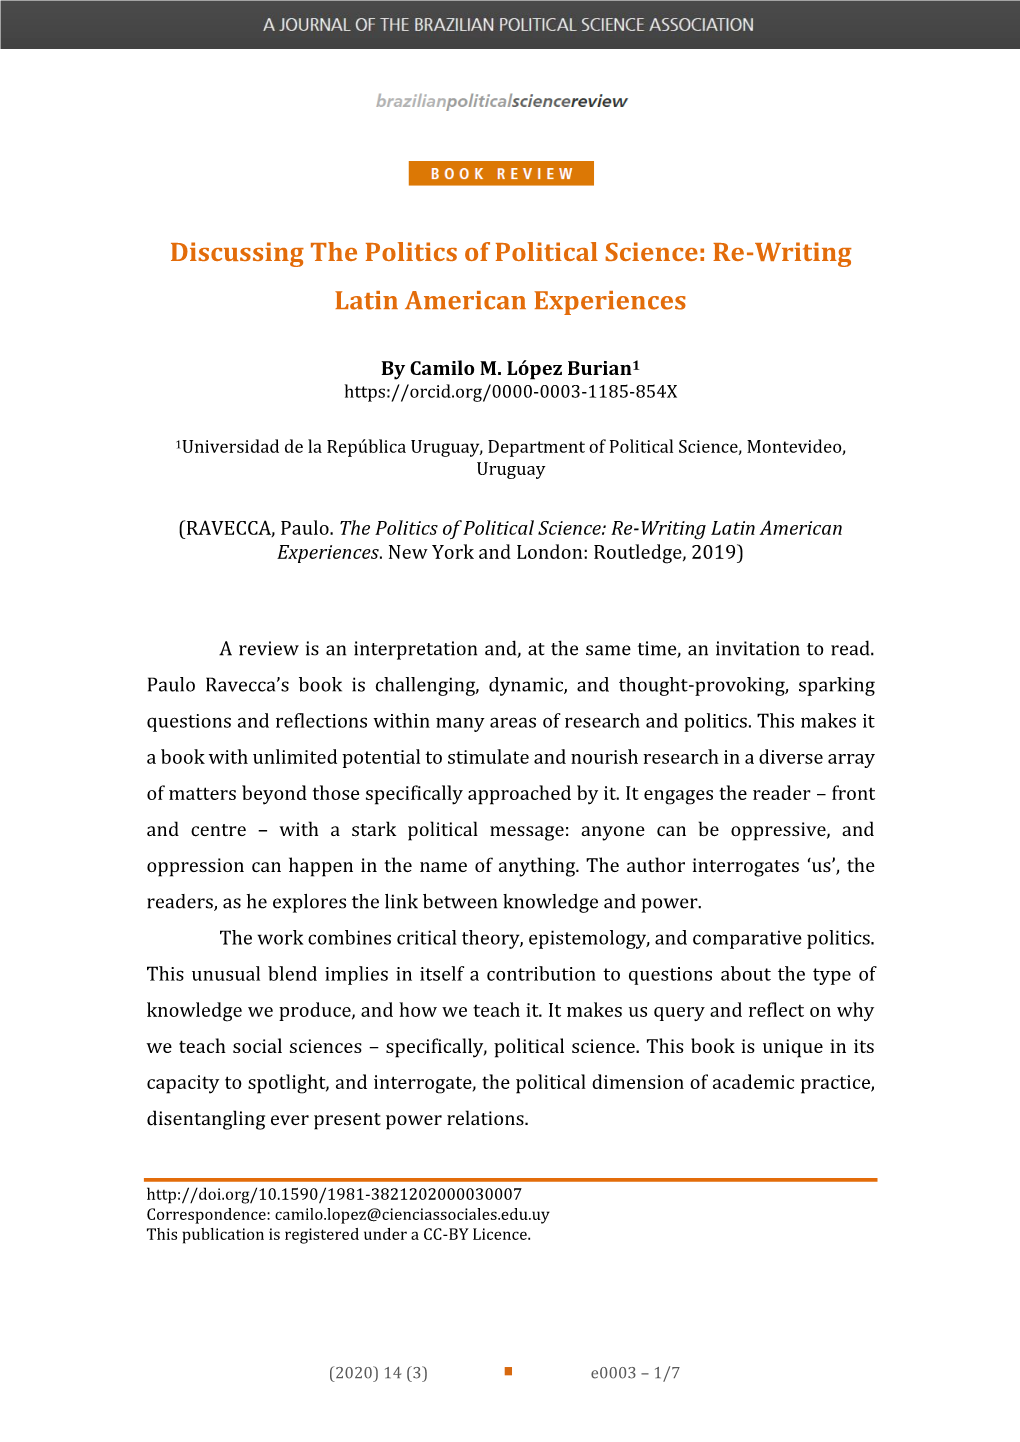 Discussing the Politics of Political Science: Re-Writing Latin American Experiences